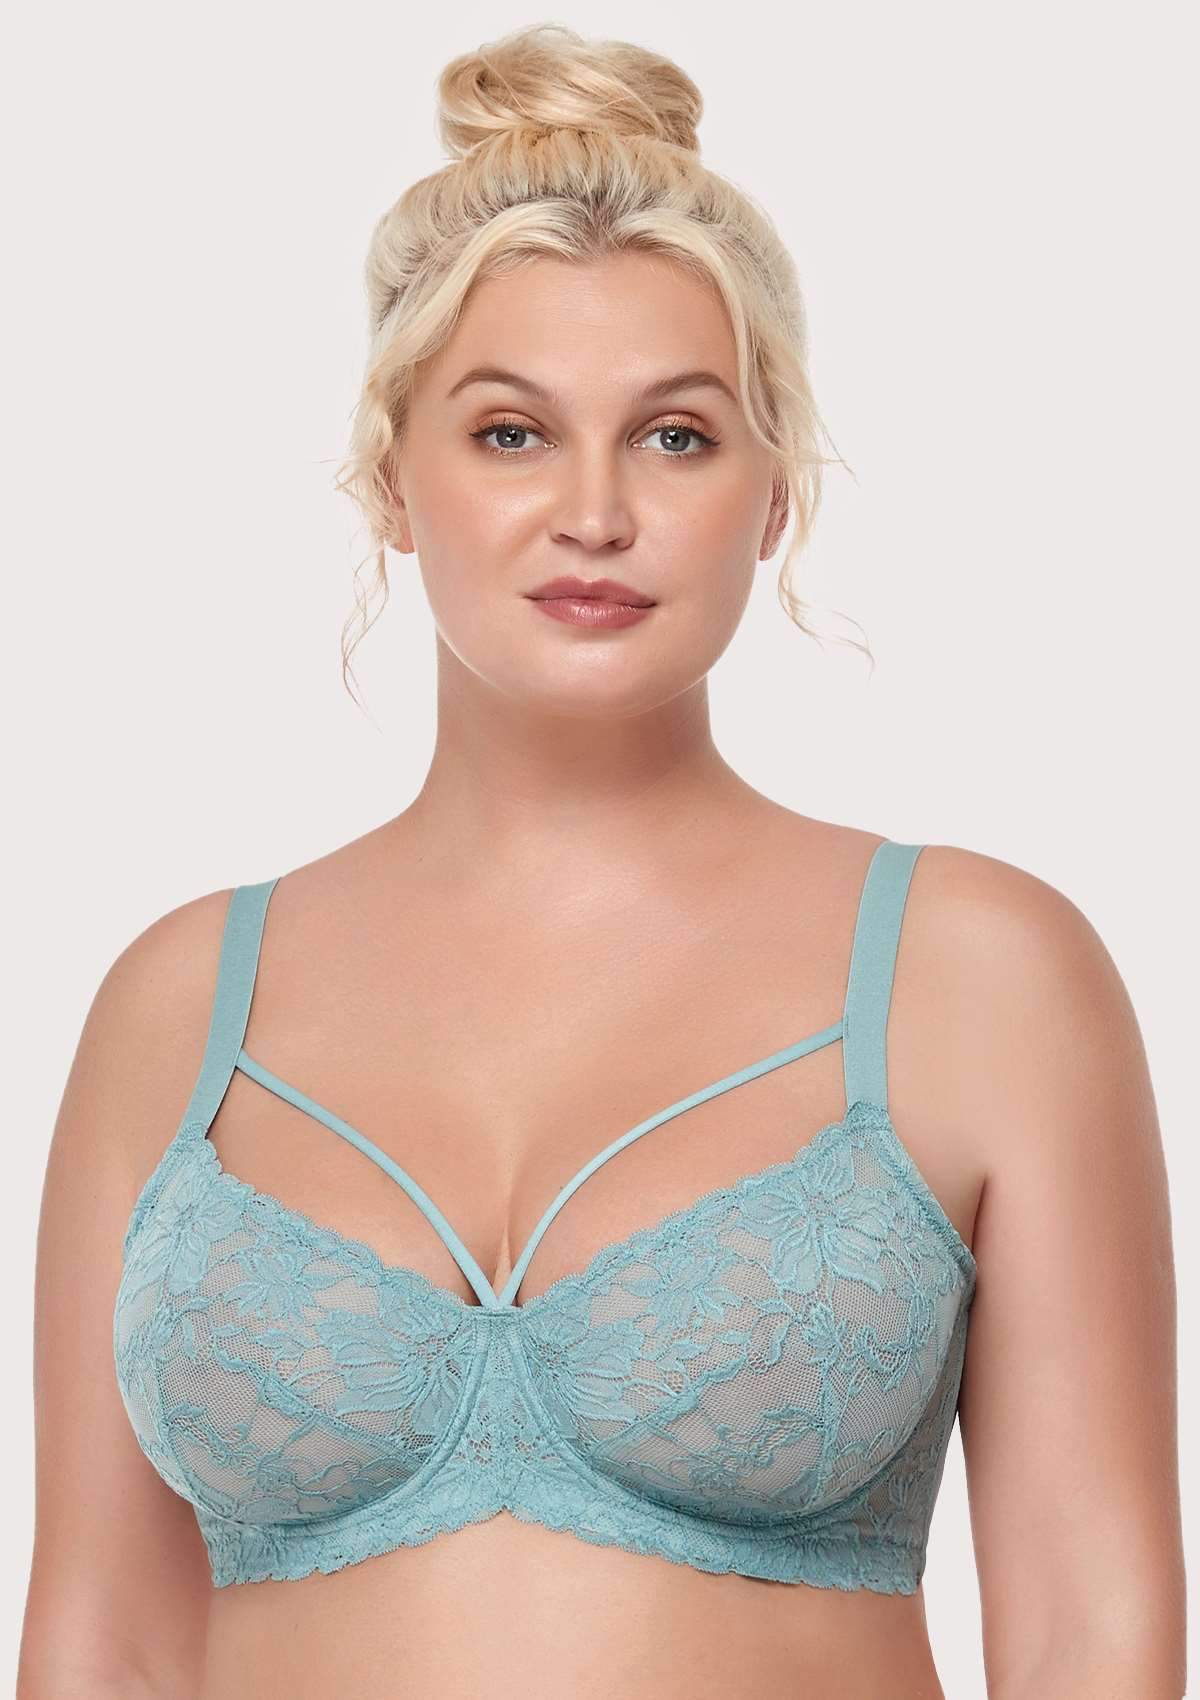 HSIA Pretty In Petals Unlined Lace Bra: Comfortable And Supportive Bra - Crystal Blue / 34 / DDD/F